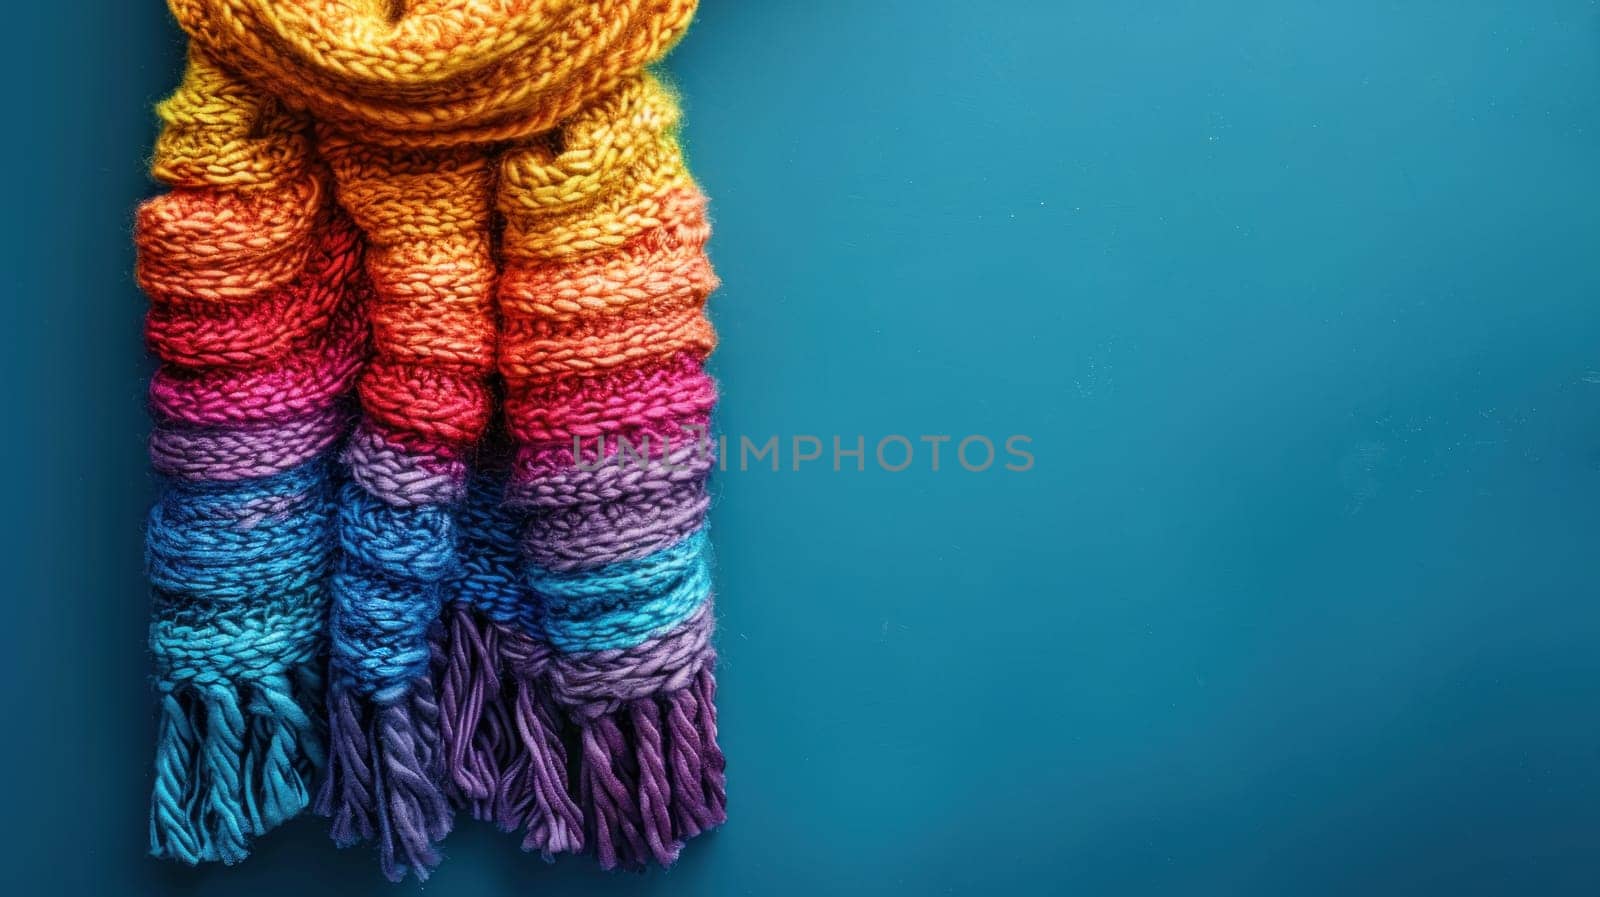 A colorful scarf is hanging on a blue background by golfmerrymaker